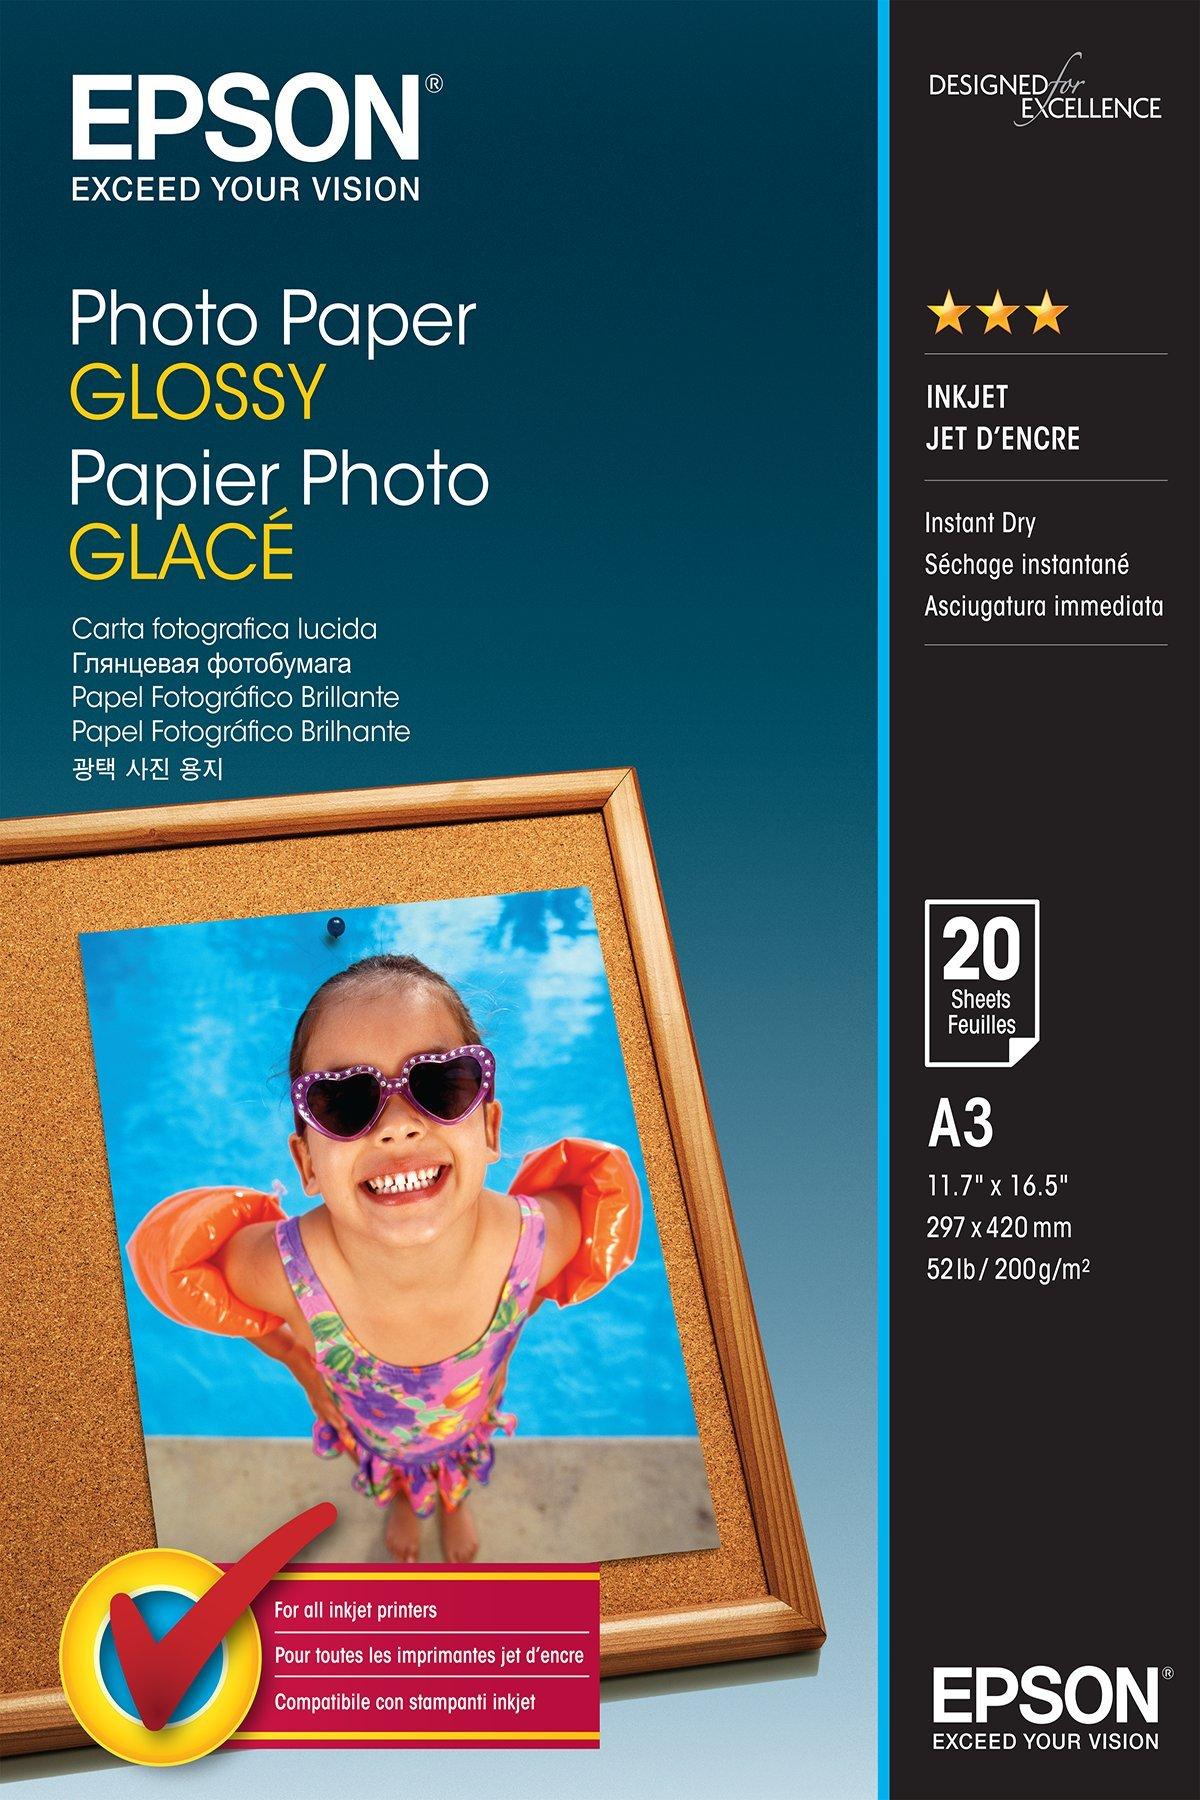 P670240S/20 PAPEL FOTOGRAFICO A4 240 Gr. GLOSSY PAPER 20 hojas